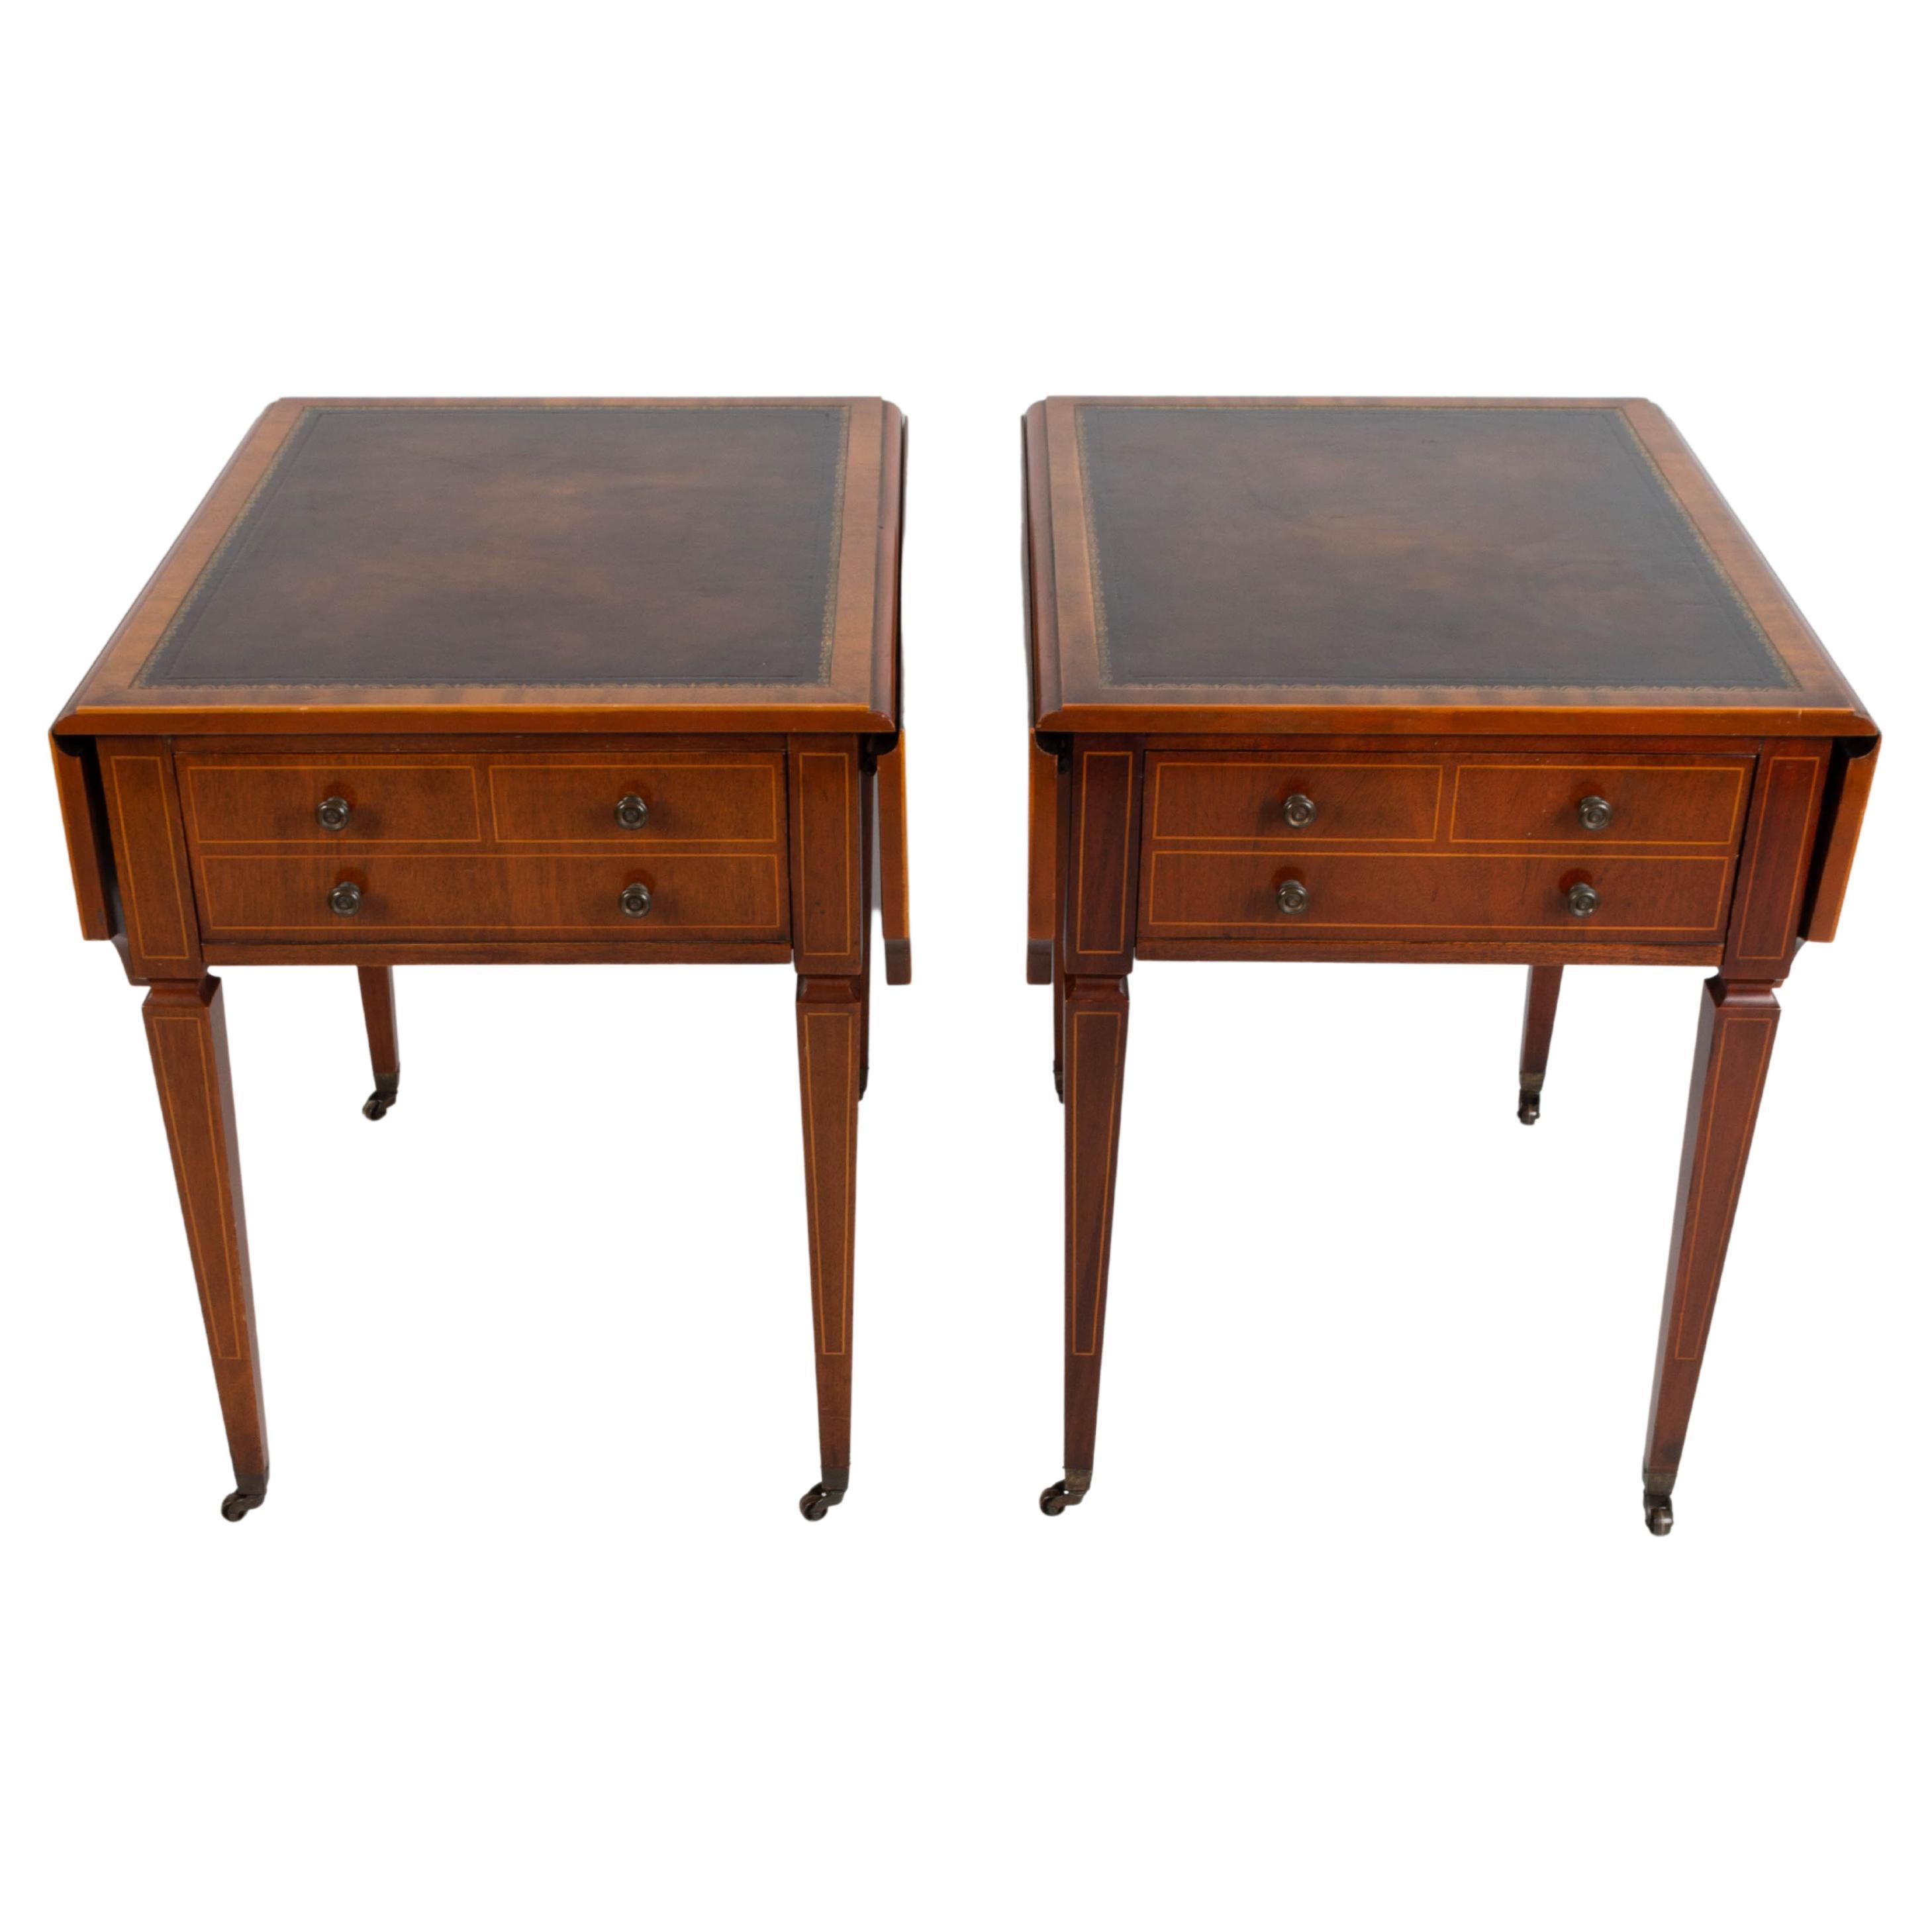 Pair English Georgian 18th Century Revival Leather Inset Drop Leaf Sofa Tables